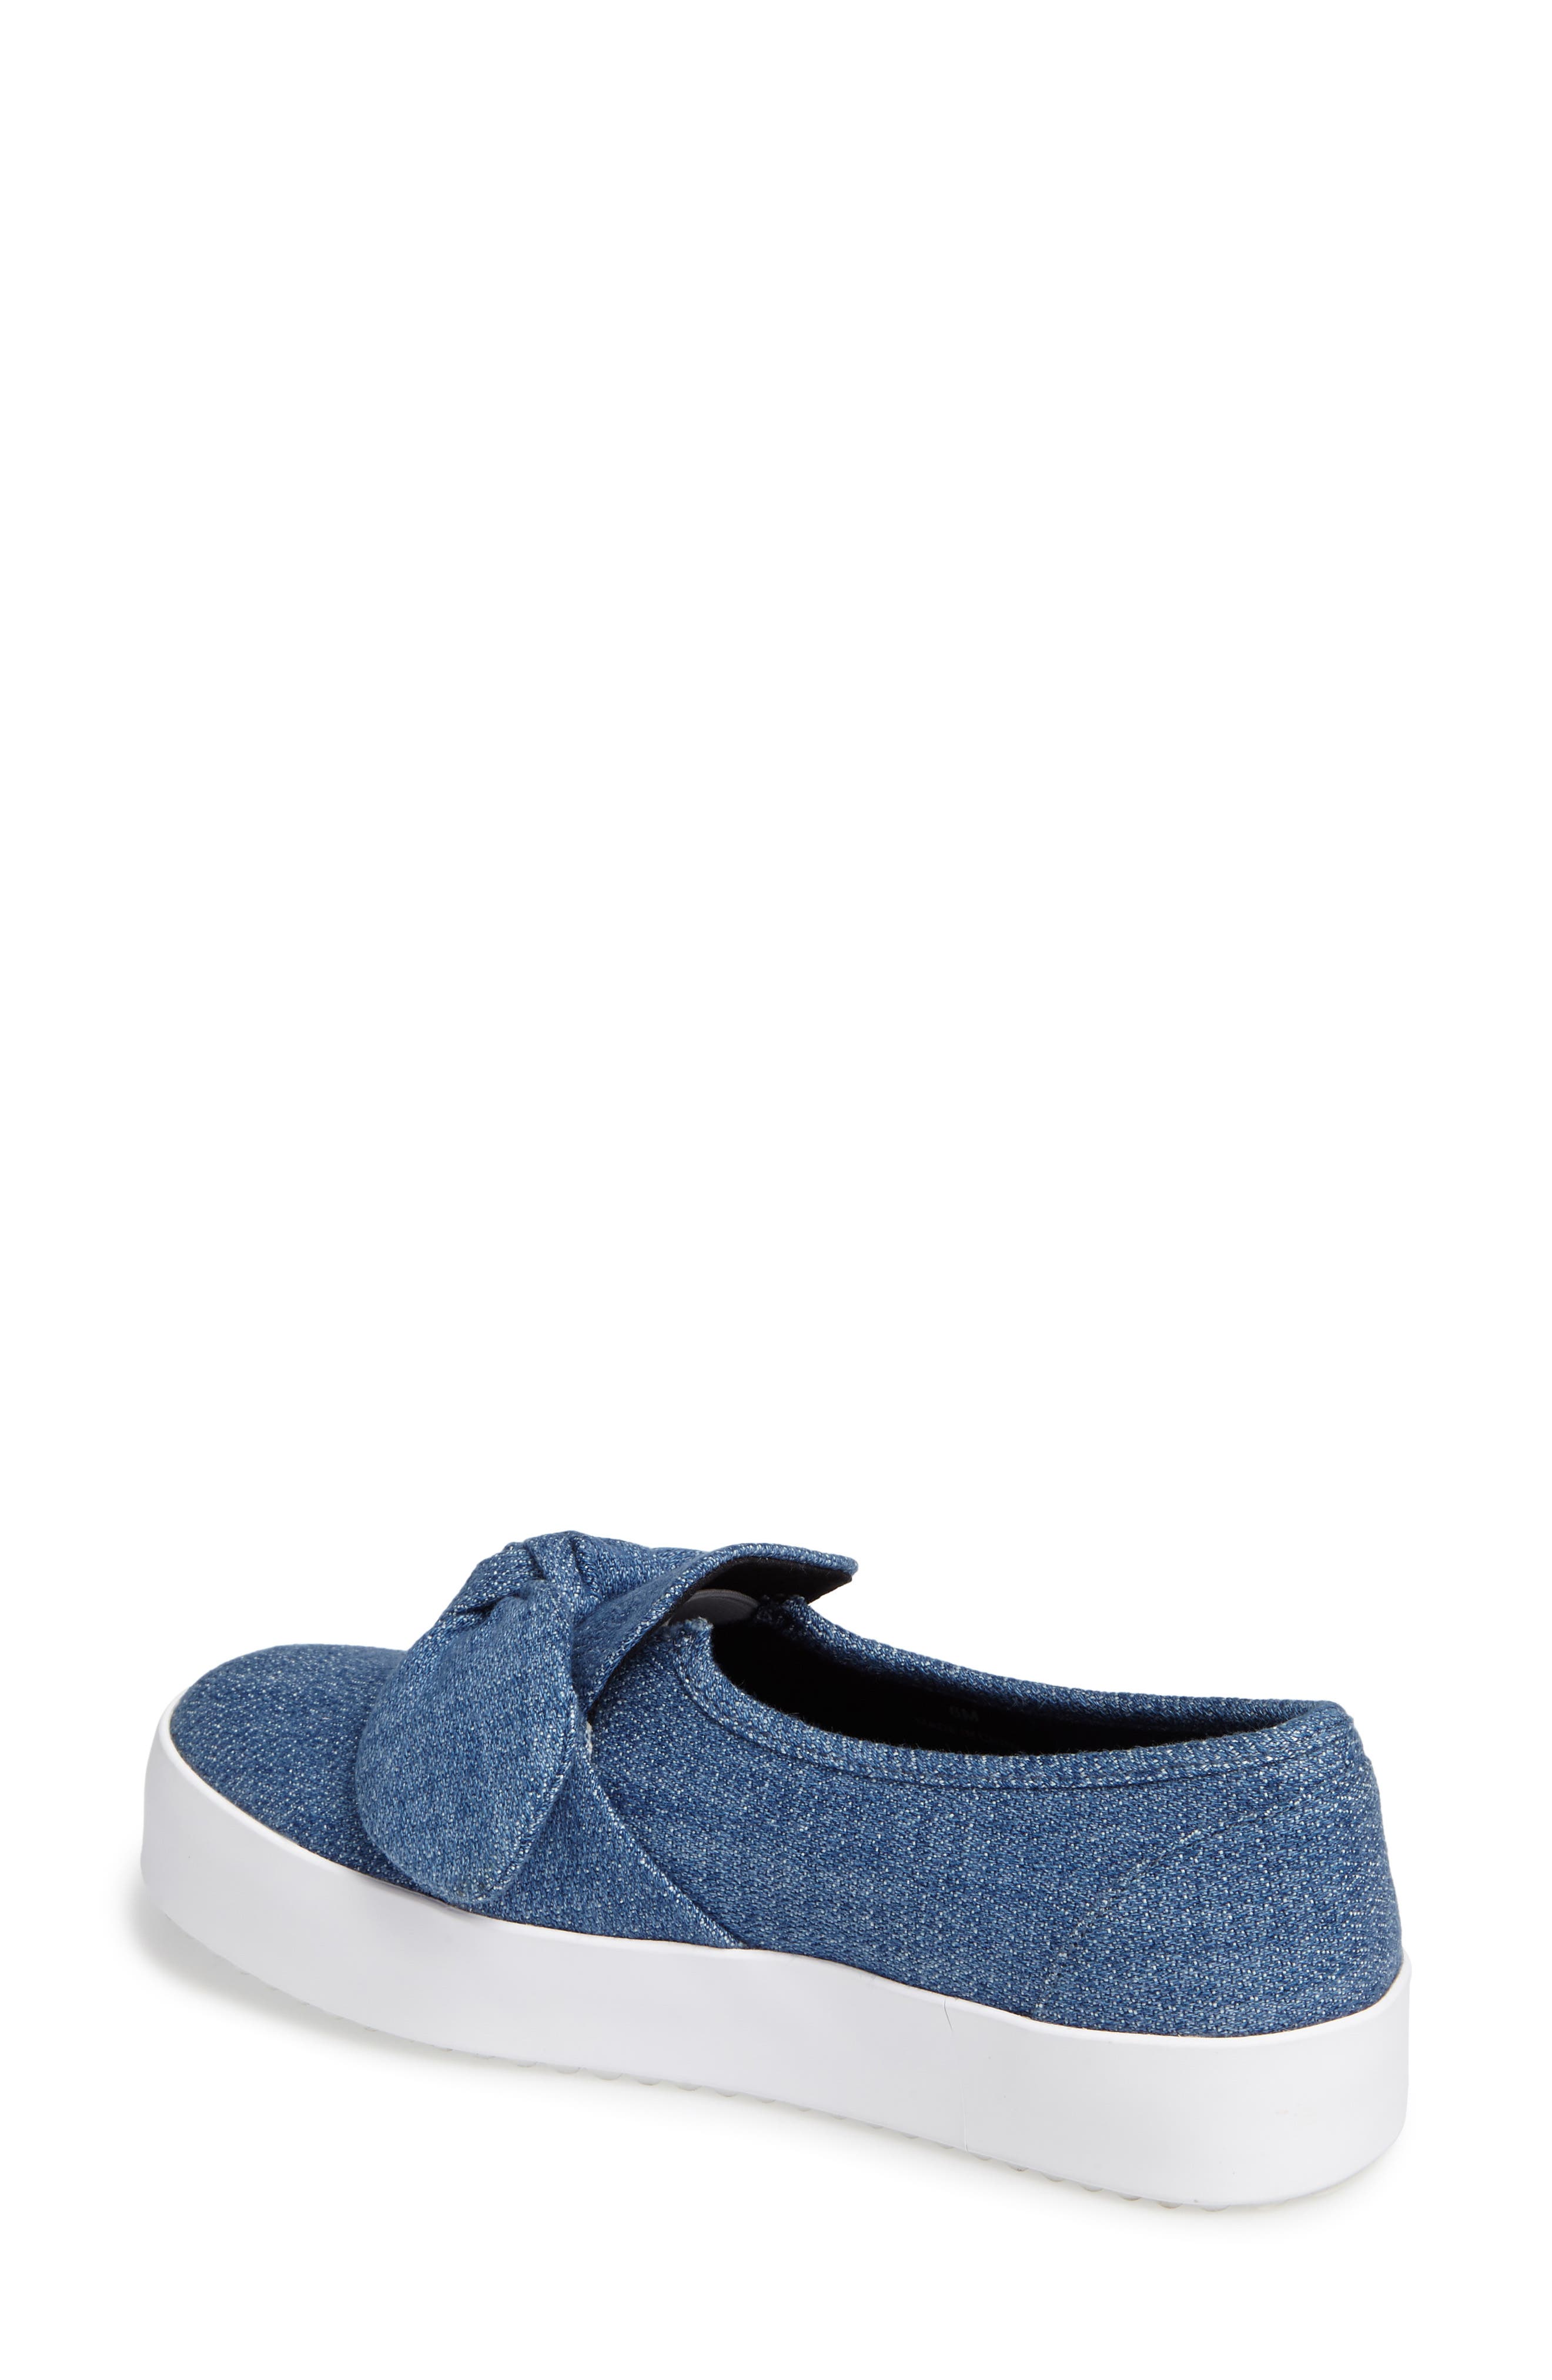 rebecca minkoff stacey bow sneakers